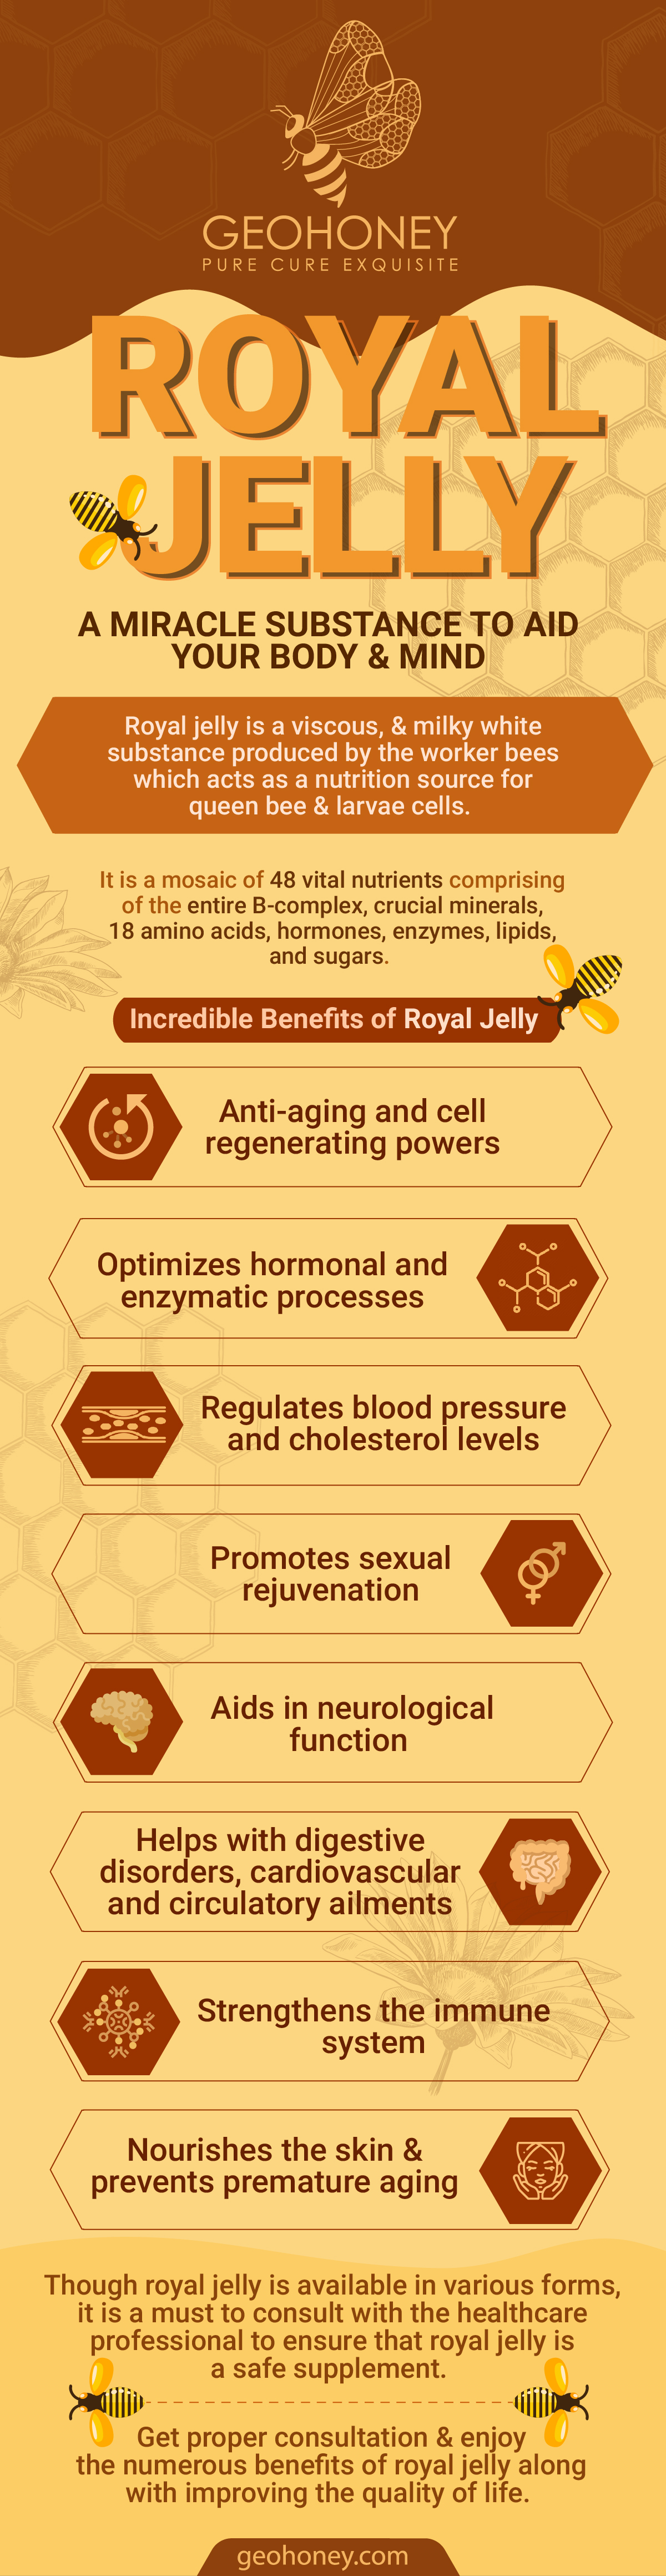 Royal Jelly - A Miracle Substance To Aid Your Body and Mind